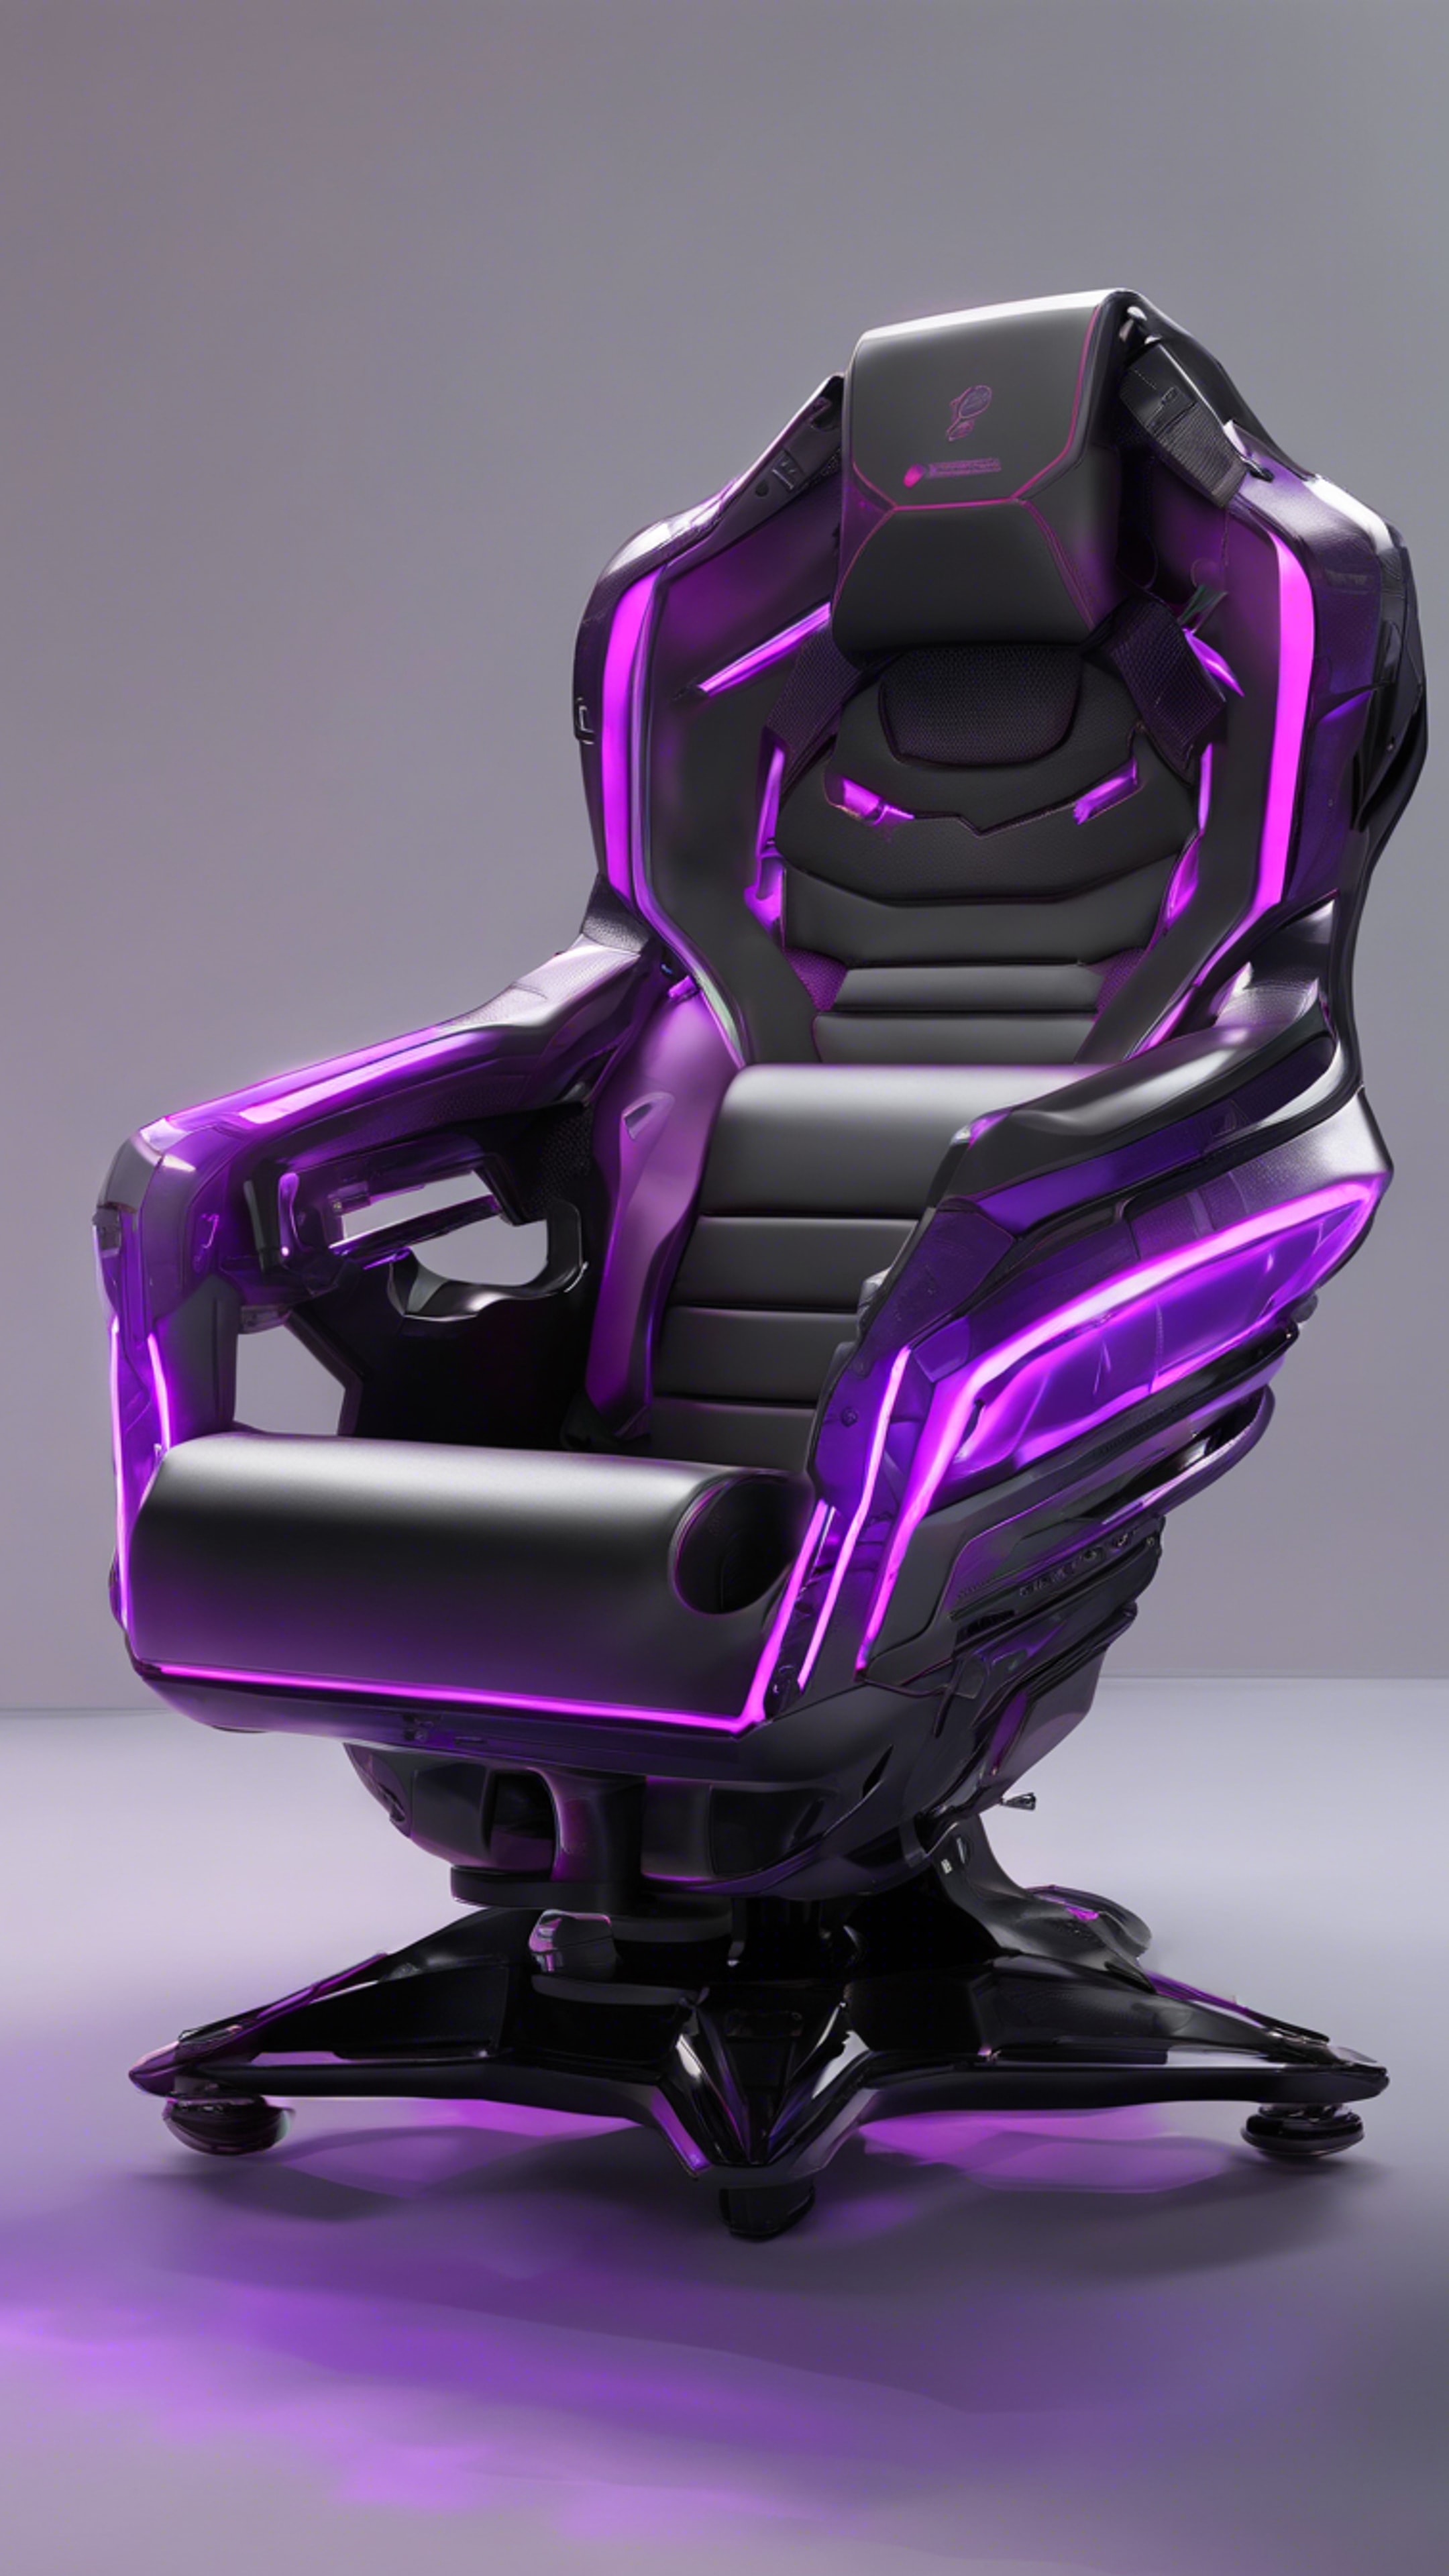 A futuristic gaming chair, jet black with neon purple accents, situated in a high-tech gaming station. Tapet[77c4183ef08040e08e97]